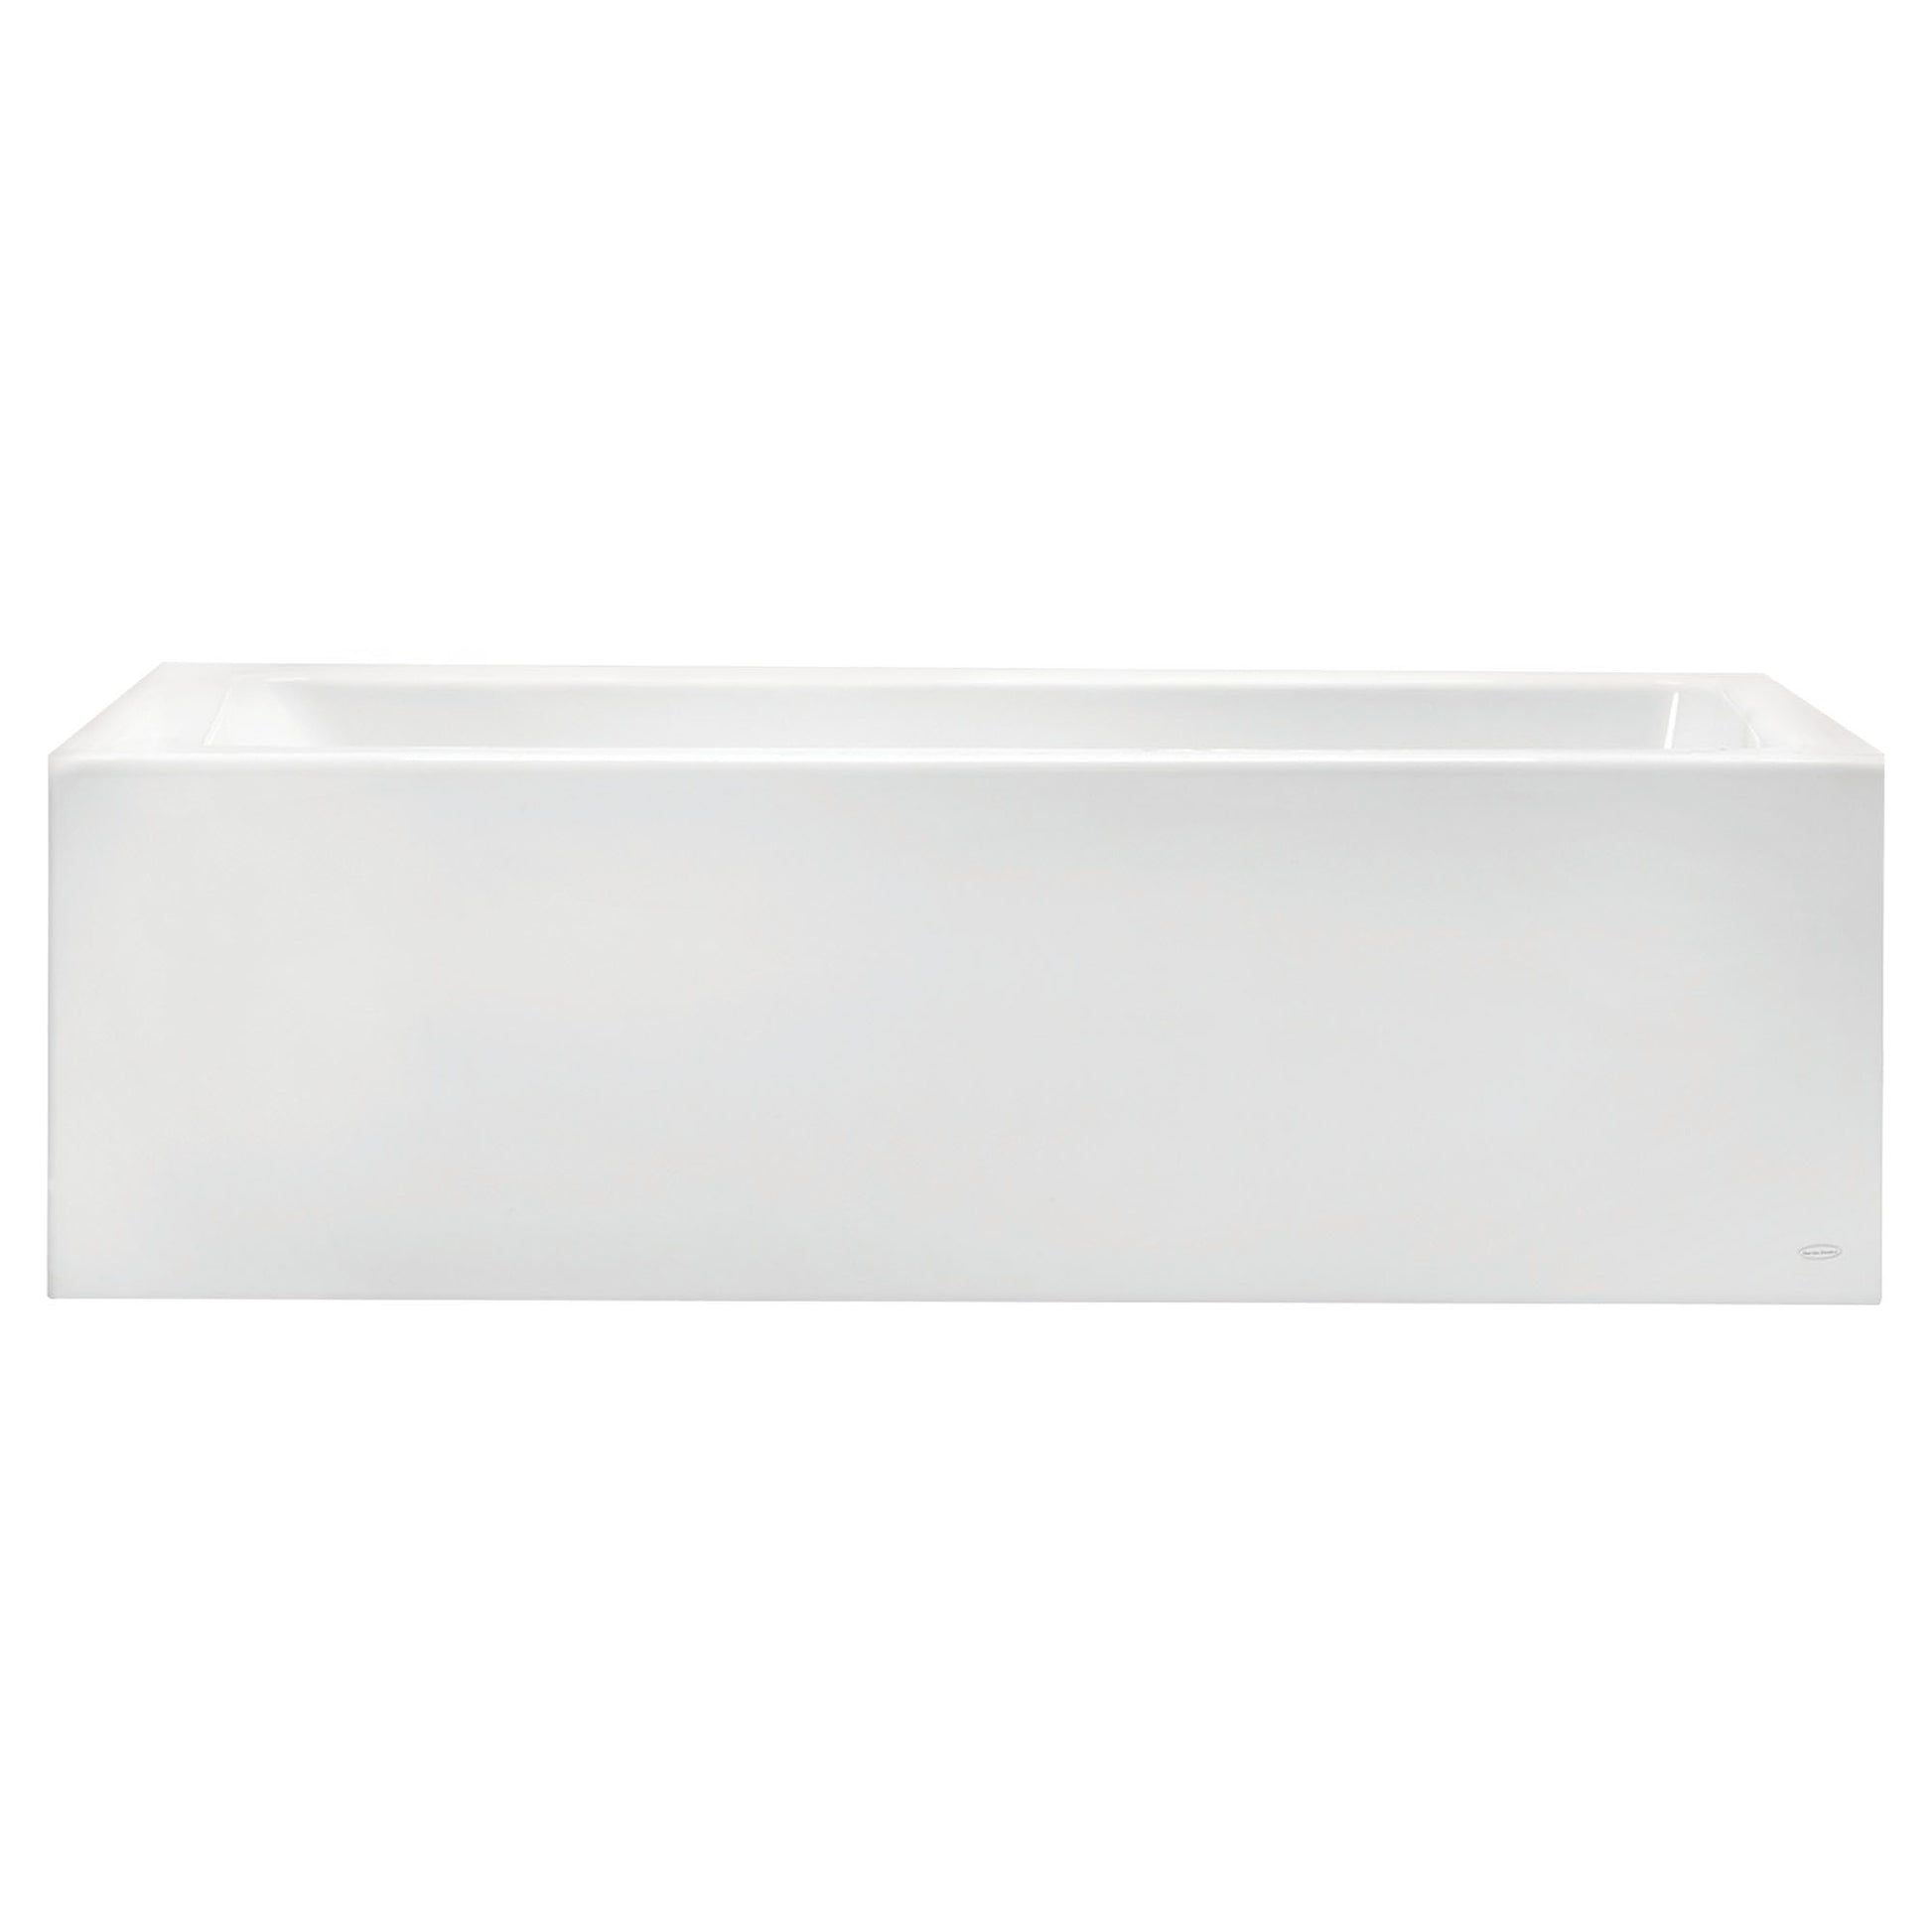 AMERICAN-STANDARD 2573102.020, Studio 60 x 30-Inch Integral Apron Bathtub Above Floor Rough with Right-Hand Outlet in White